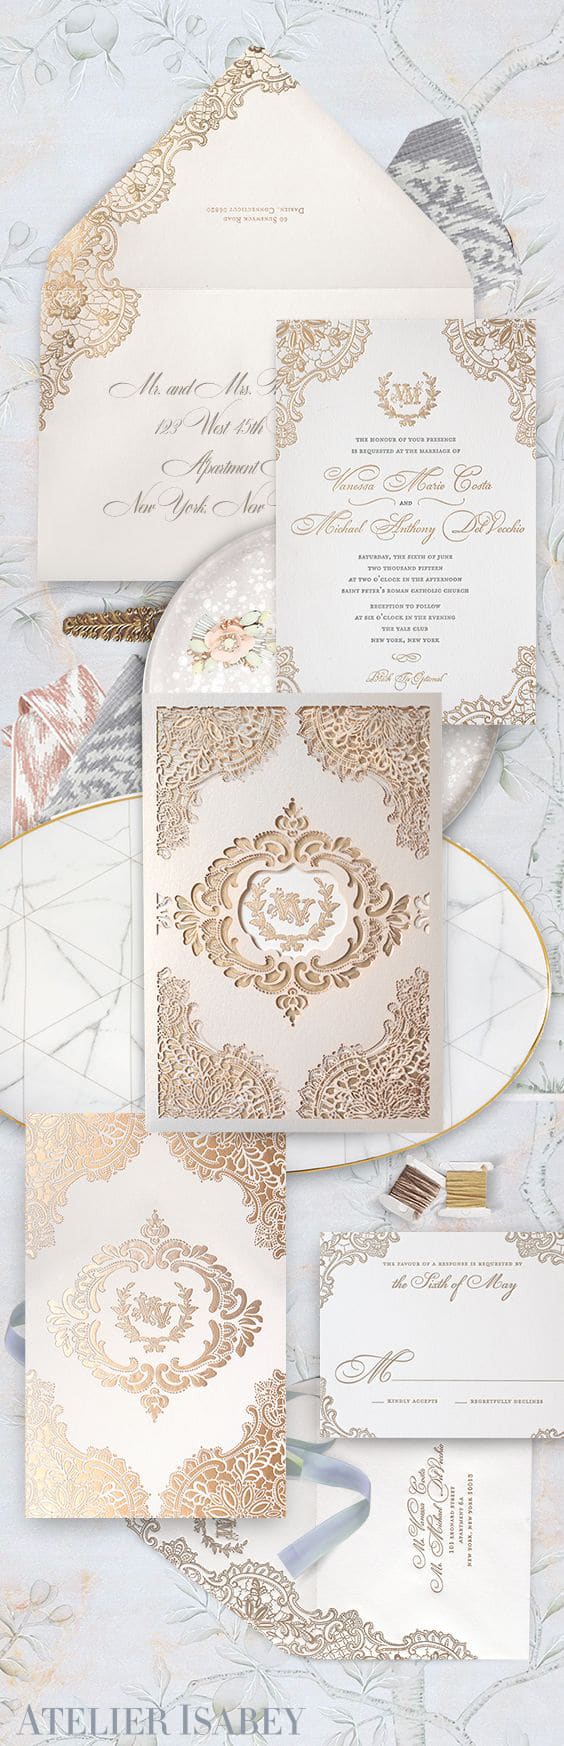 Gold lace wedding invitation with a laser cut sleeve